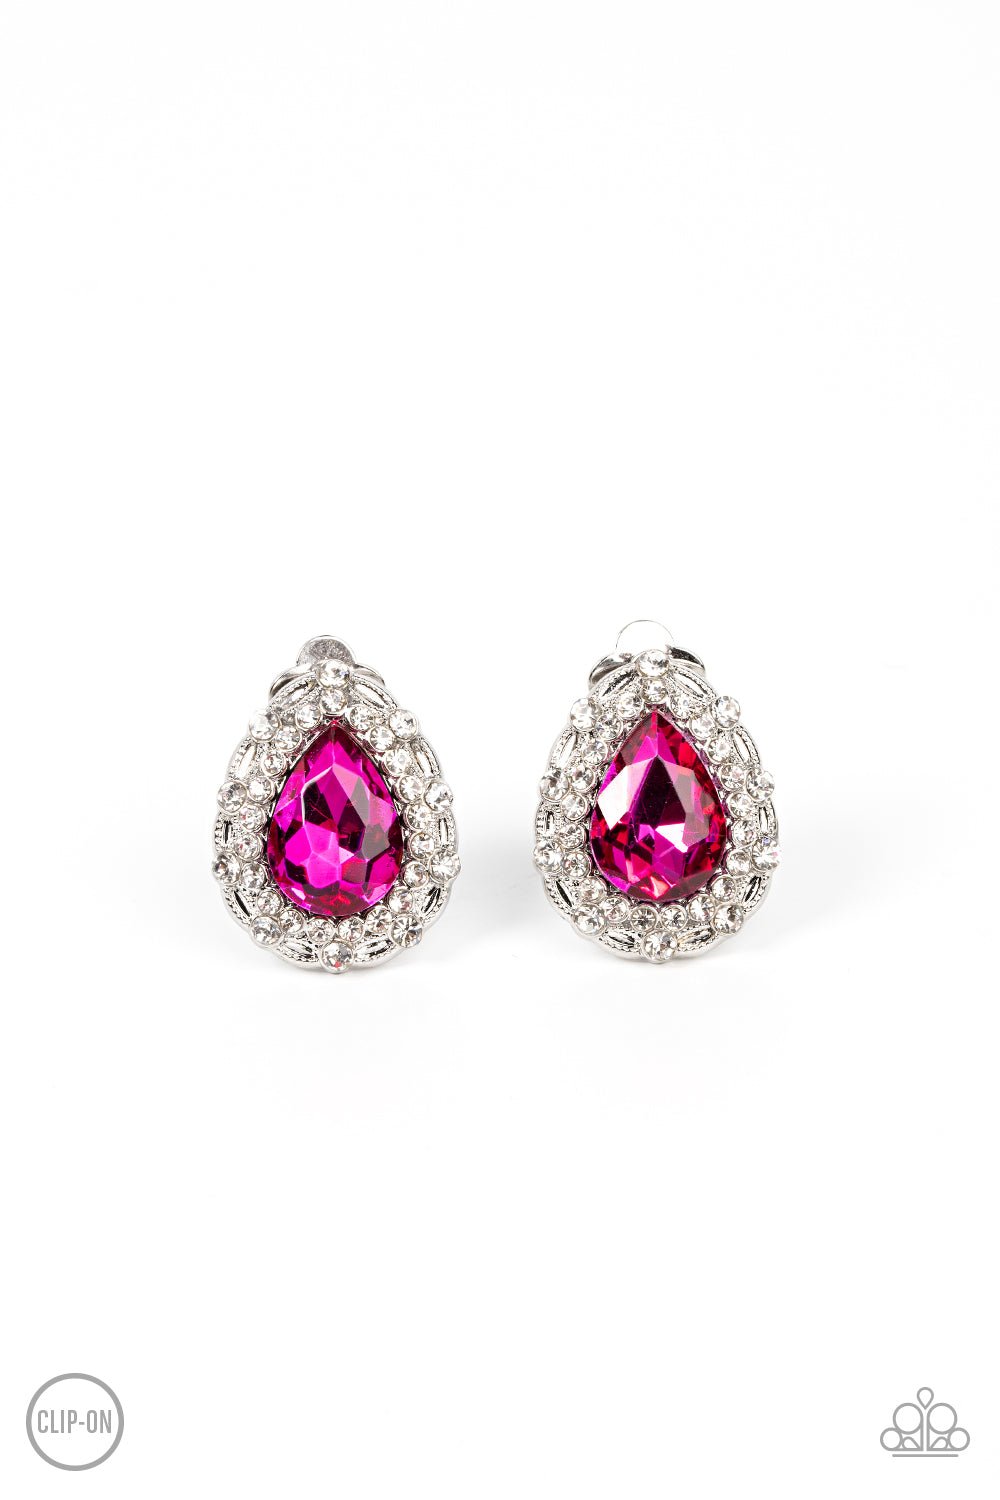 Haute Happy Hour Pink Clip-On Earring - Paparazzi Accessories  An oversized Fuchsia Fedora teardrop gem is elegantly bordered in glassy white rhinestones atop a decorative silver frame, culminating into a timeless twinkle. Earring attaches to a standard clip-on fitting.  Sold as one pair of clip-on earrings.